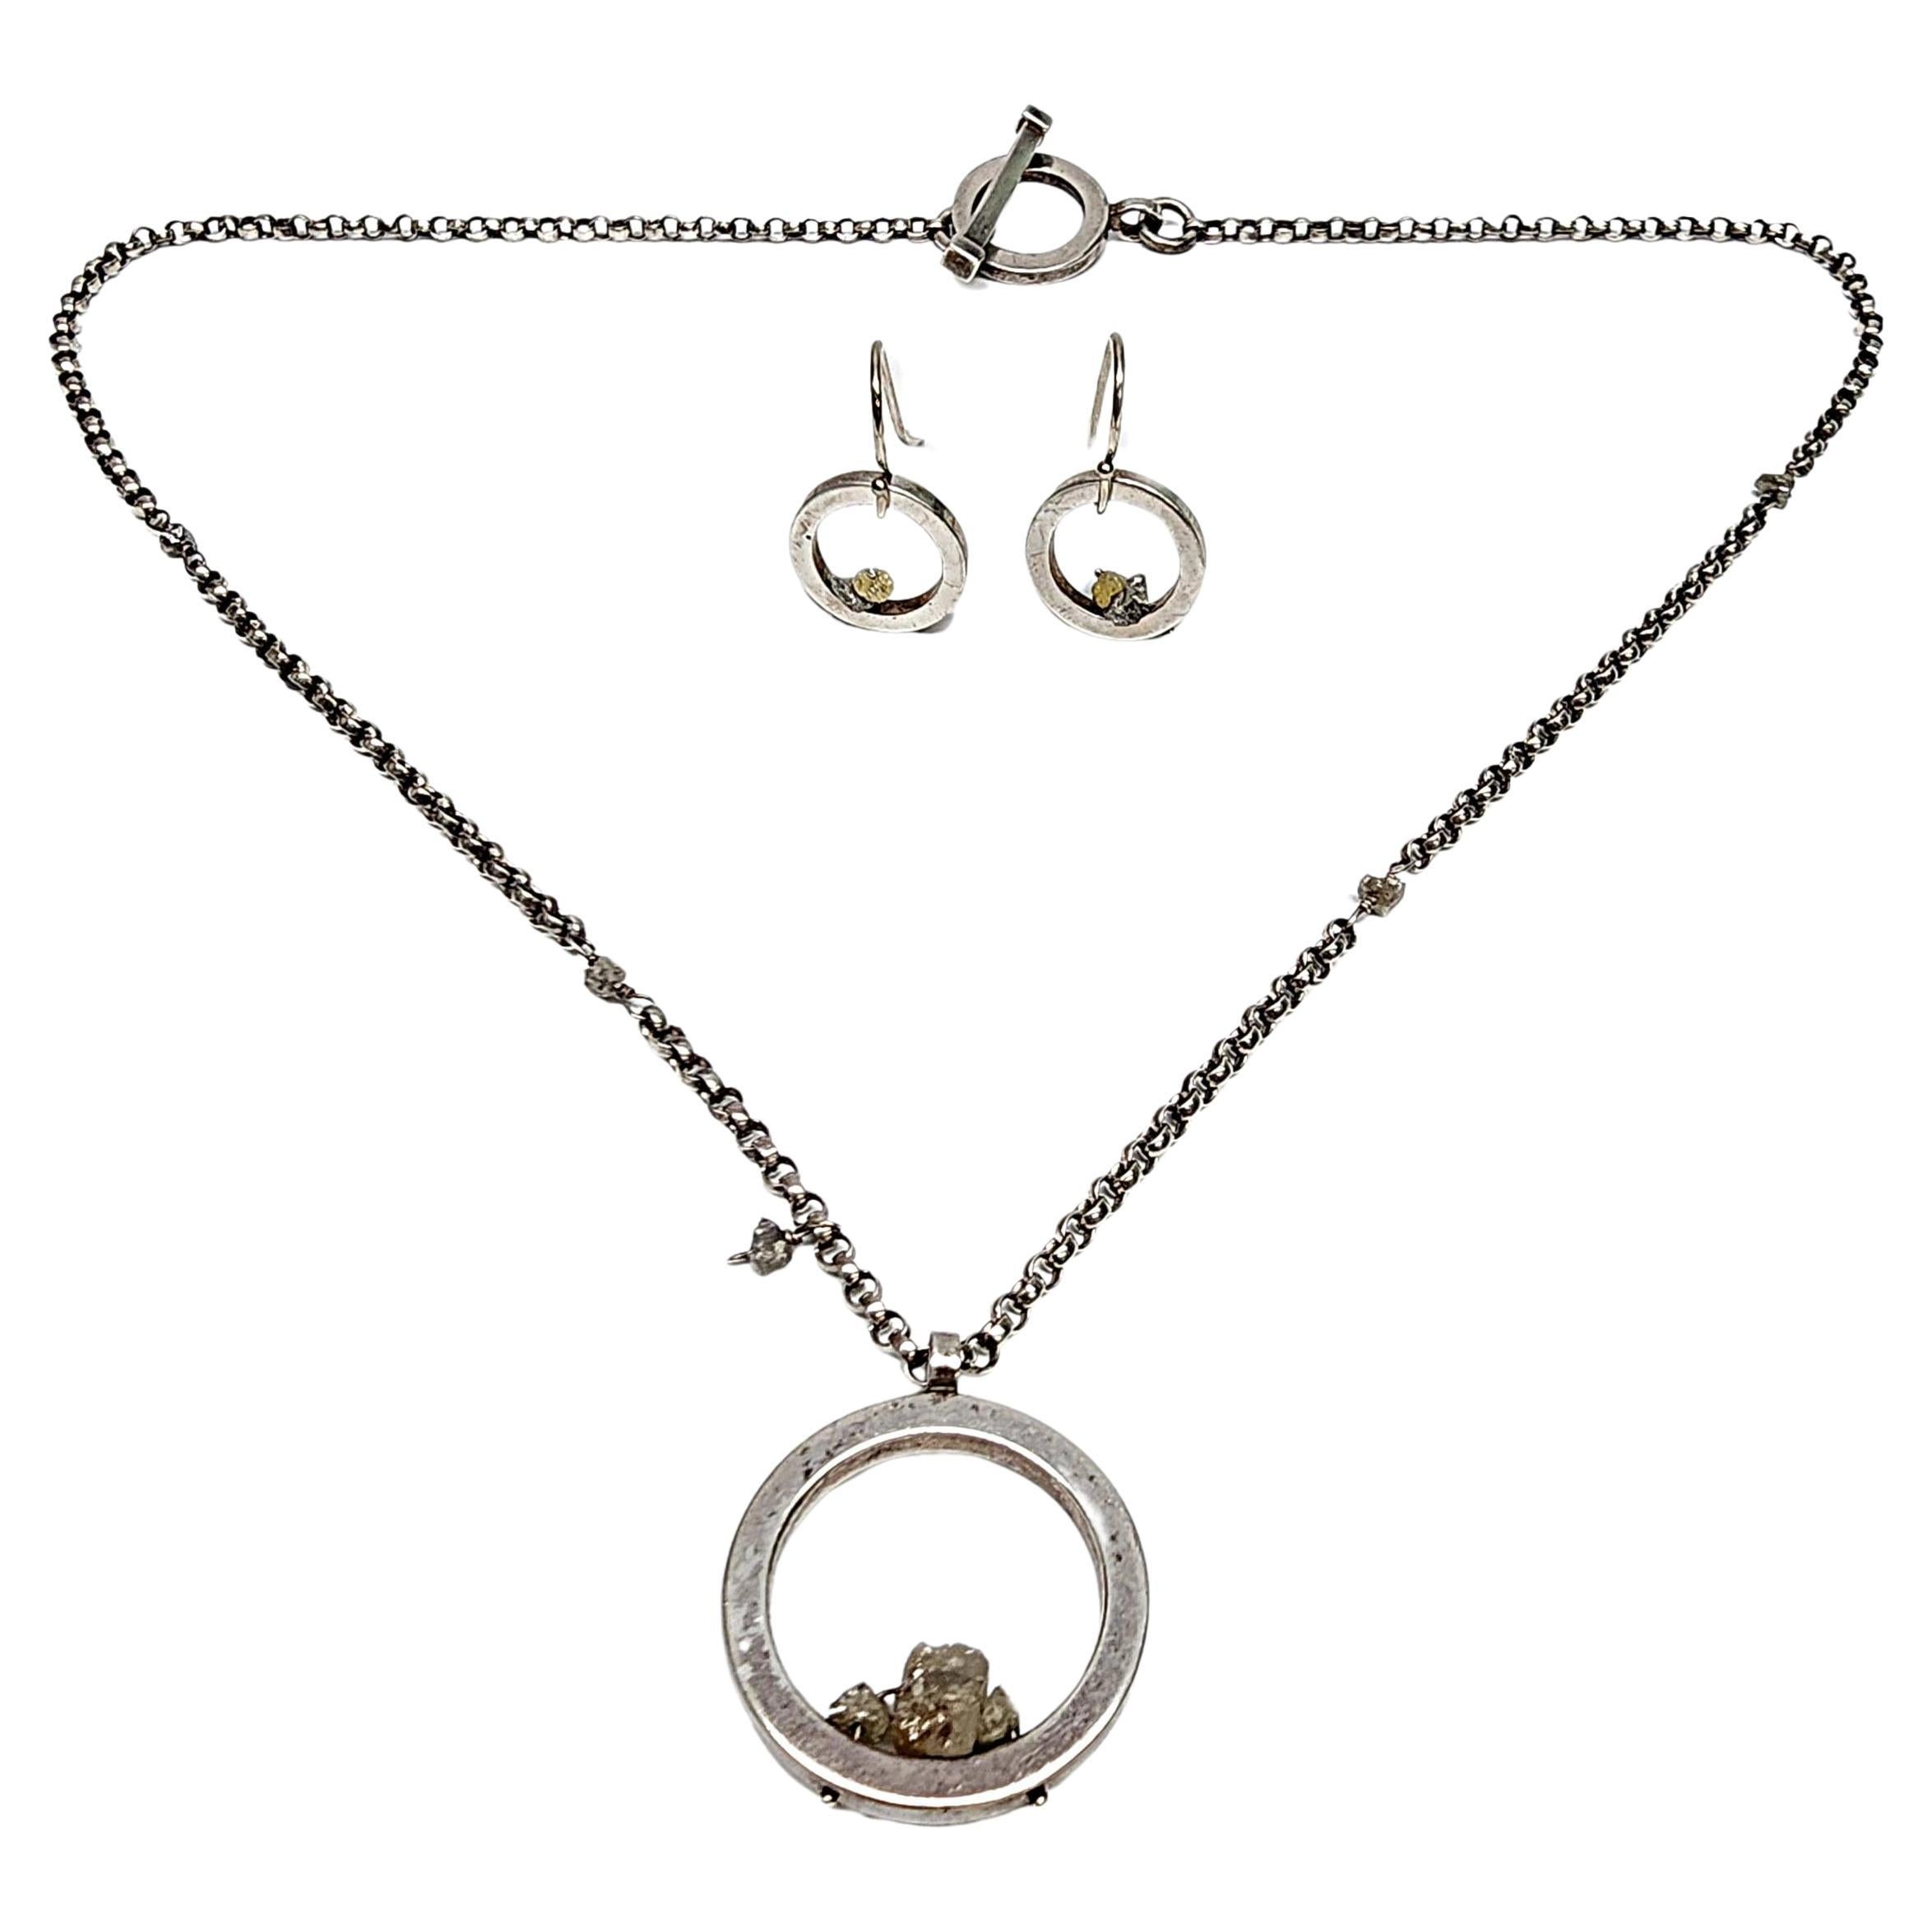 Mignon Faget Sterling Silver Circle With Stones Necklace & Earrings Set #16601